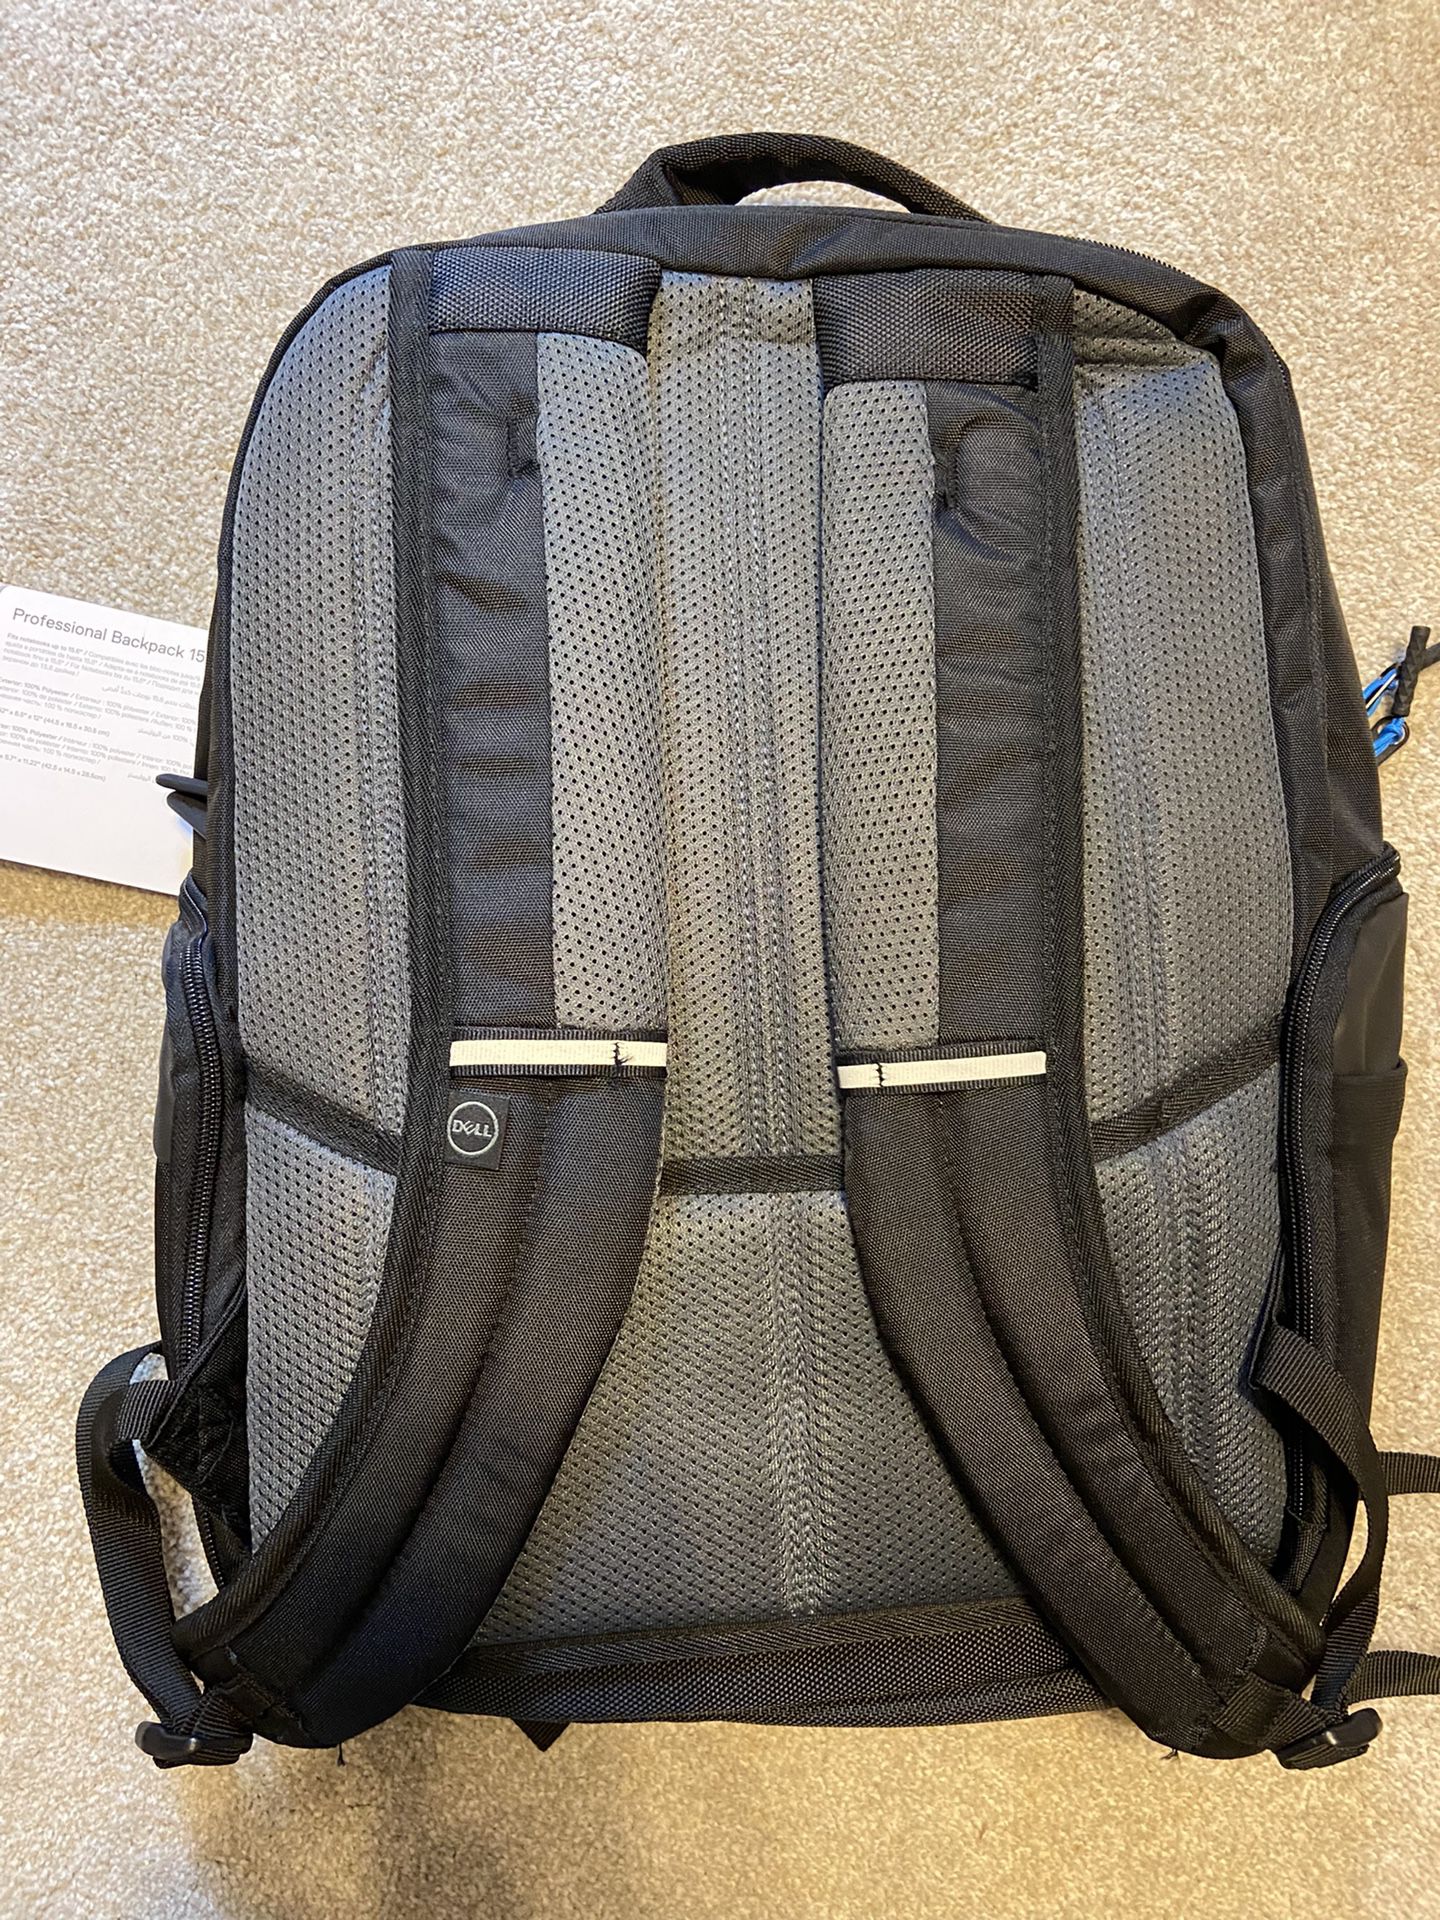 Dell Laptop Backpack (never used)